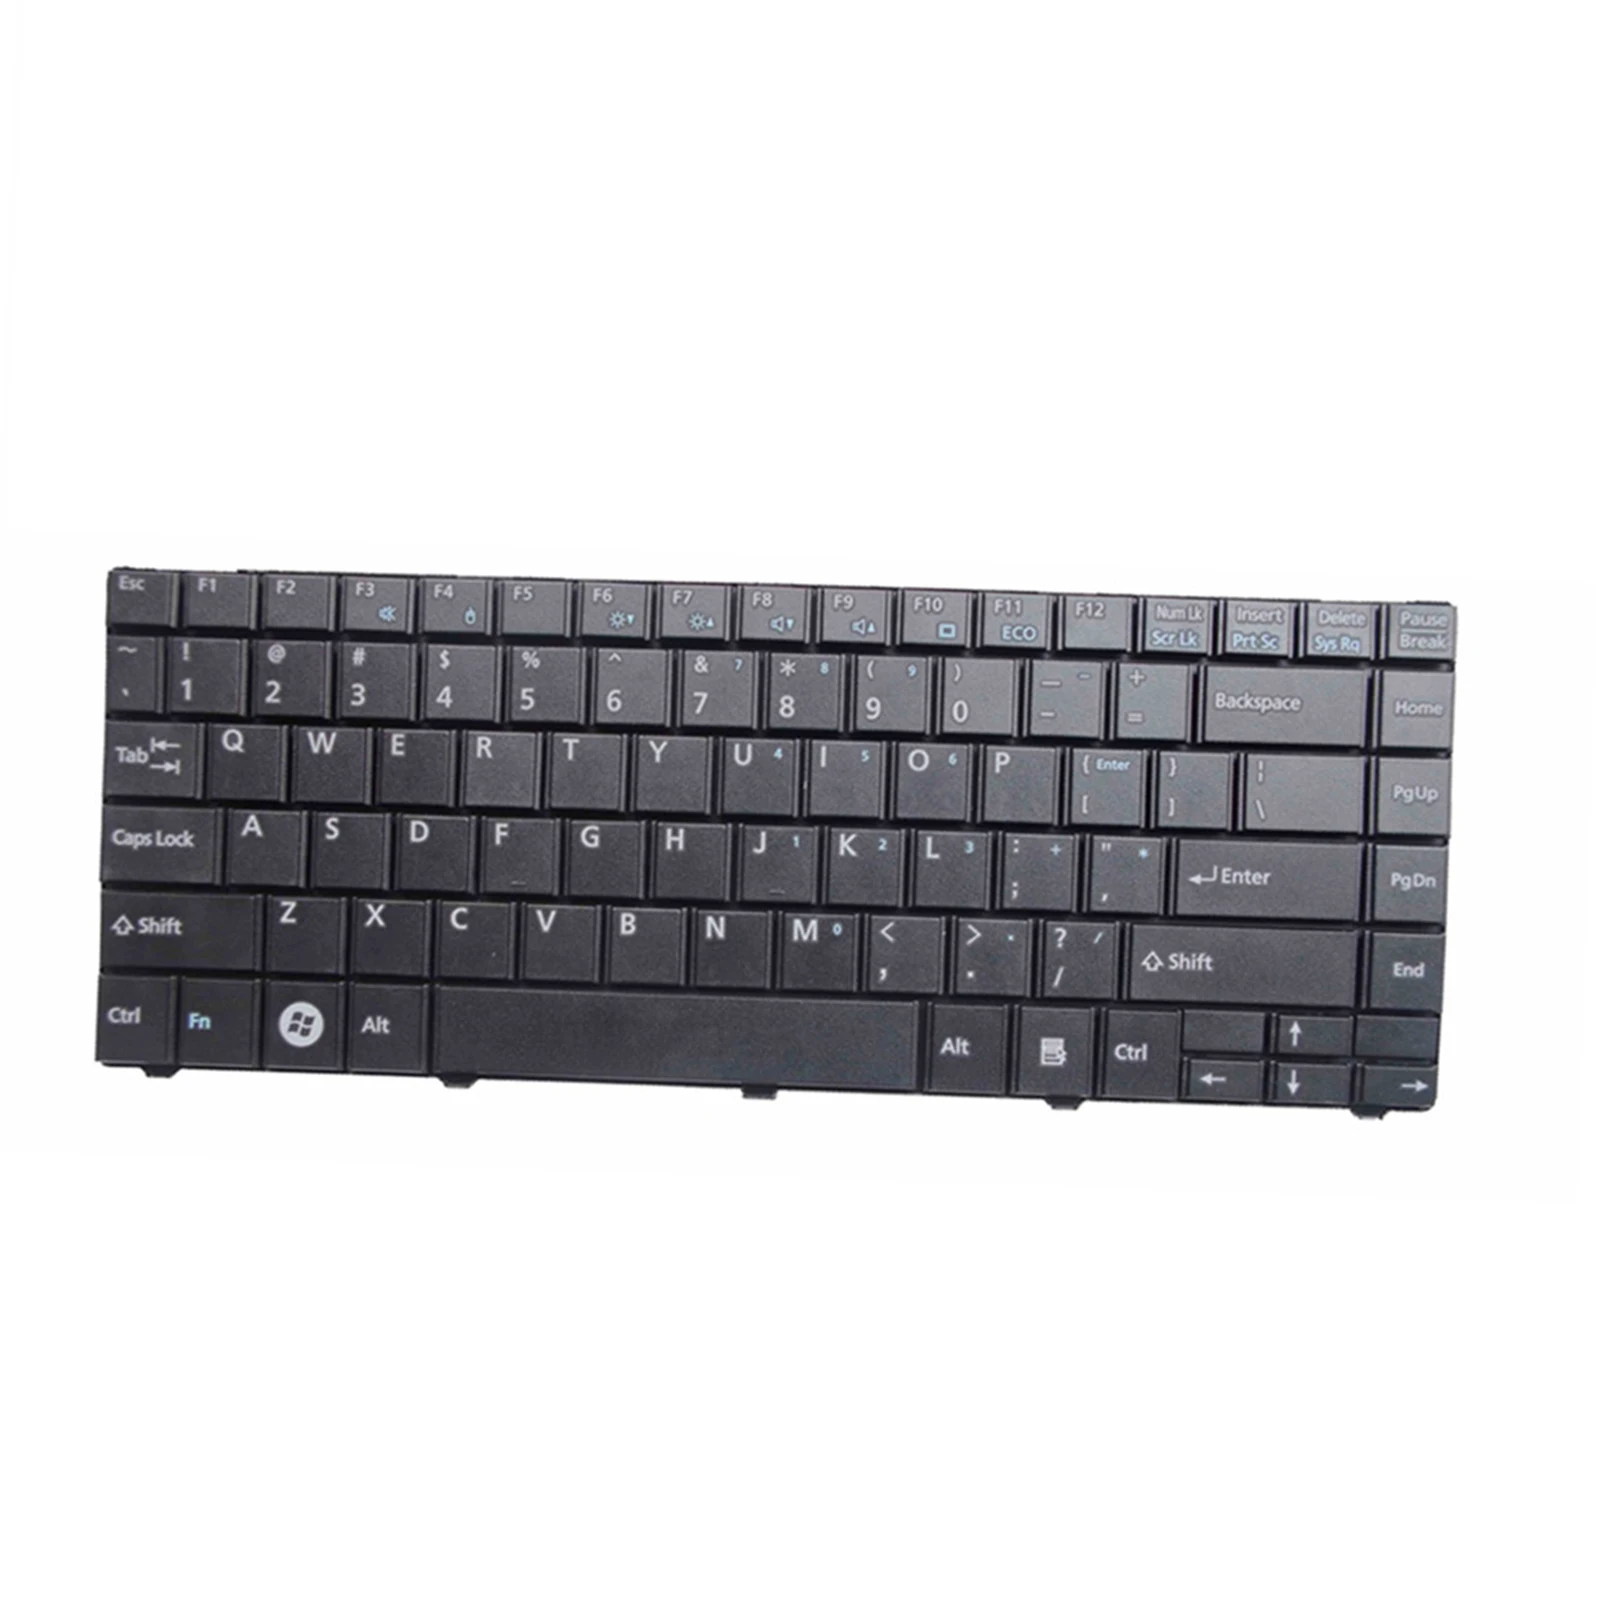 Laptop Keyboard Fits for Fujitsu Lifebook LH531 BH531 LH701 Replace Portable & Compact Tool | Компьютеры и офис